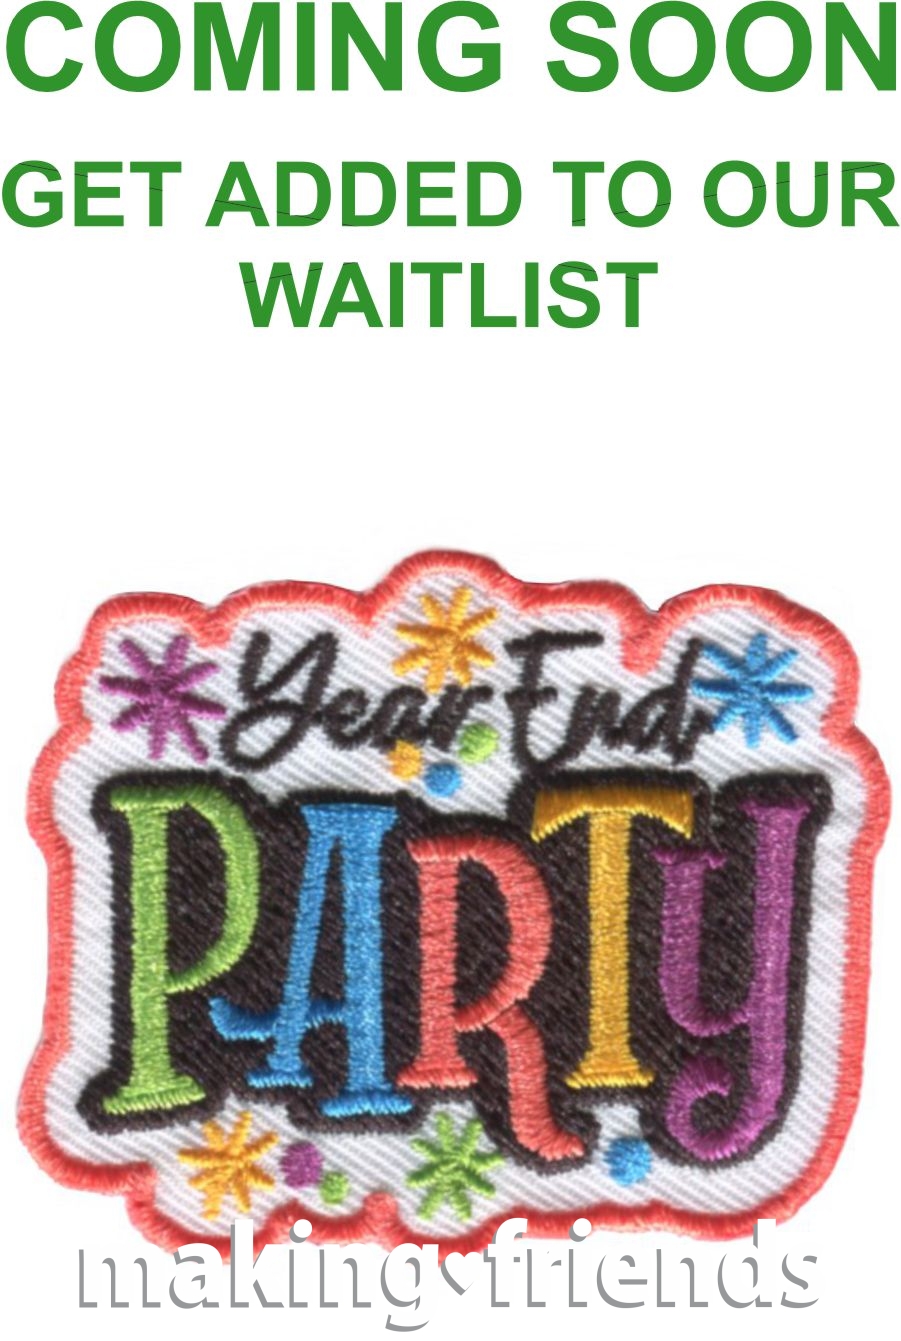 Girl Scout Year End Party Fun Patch